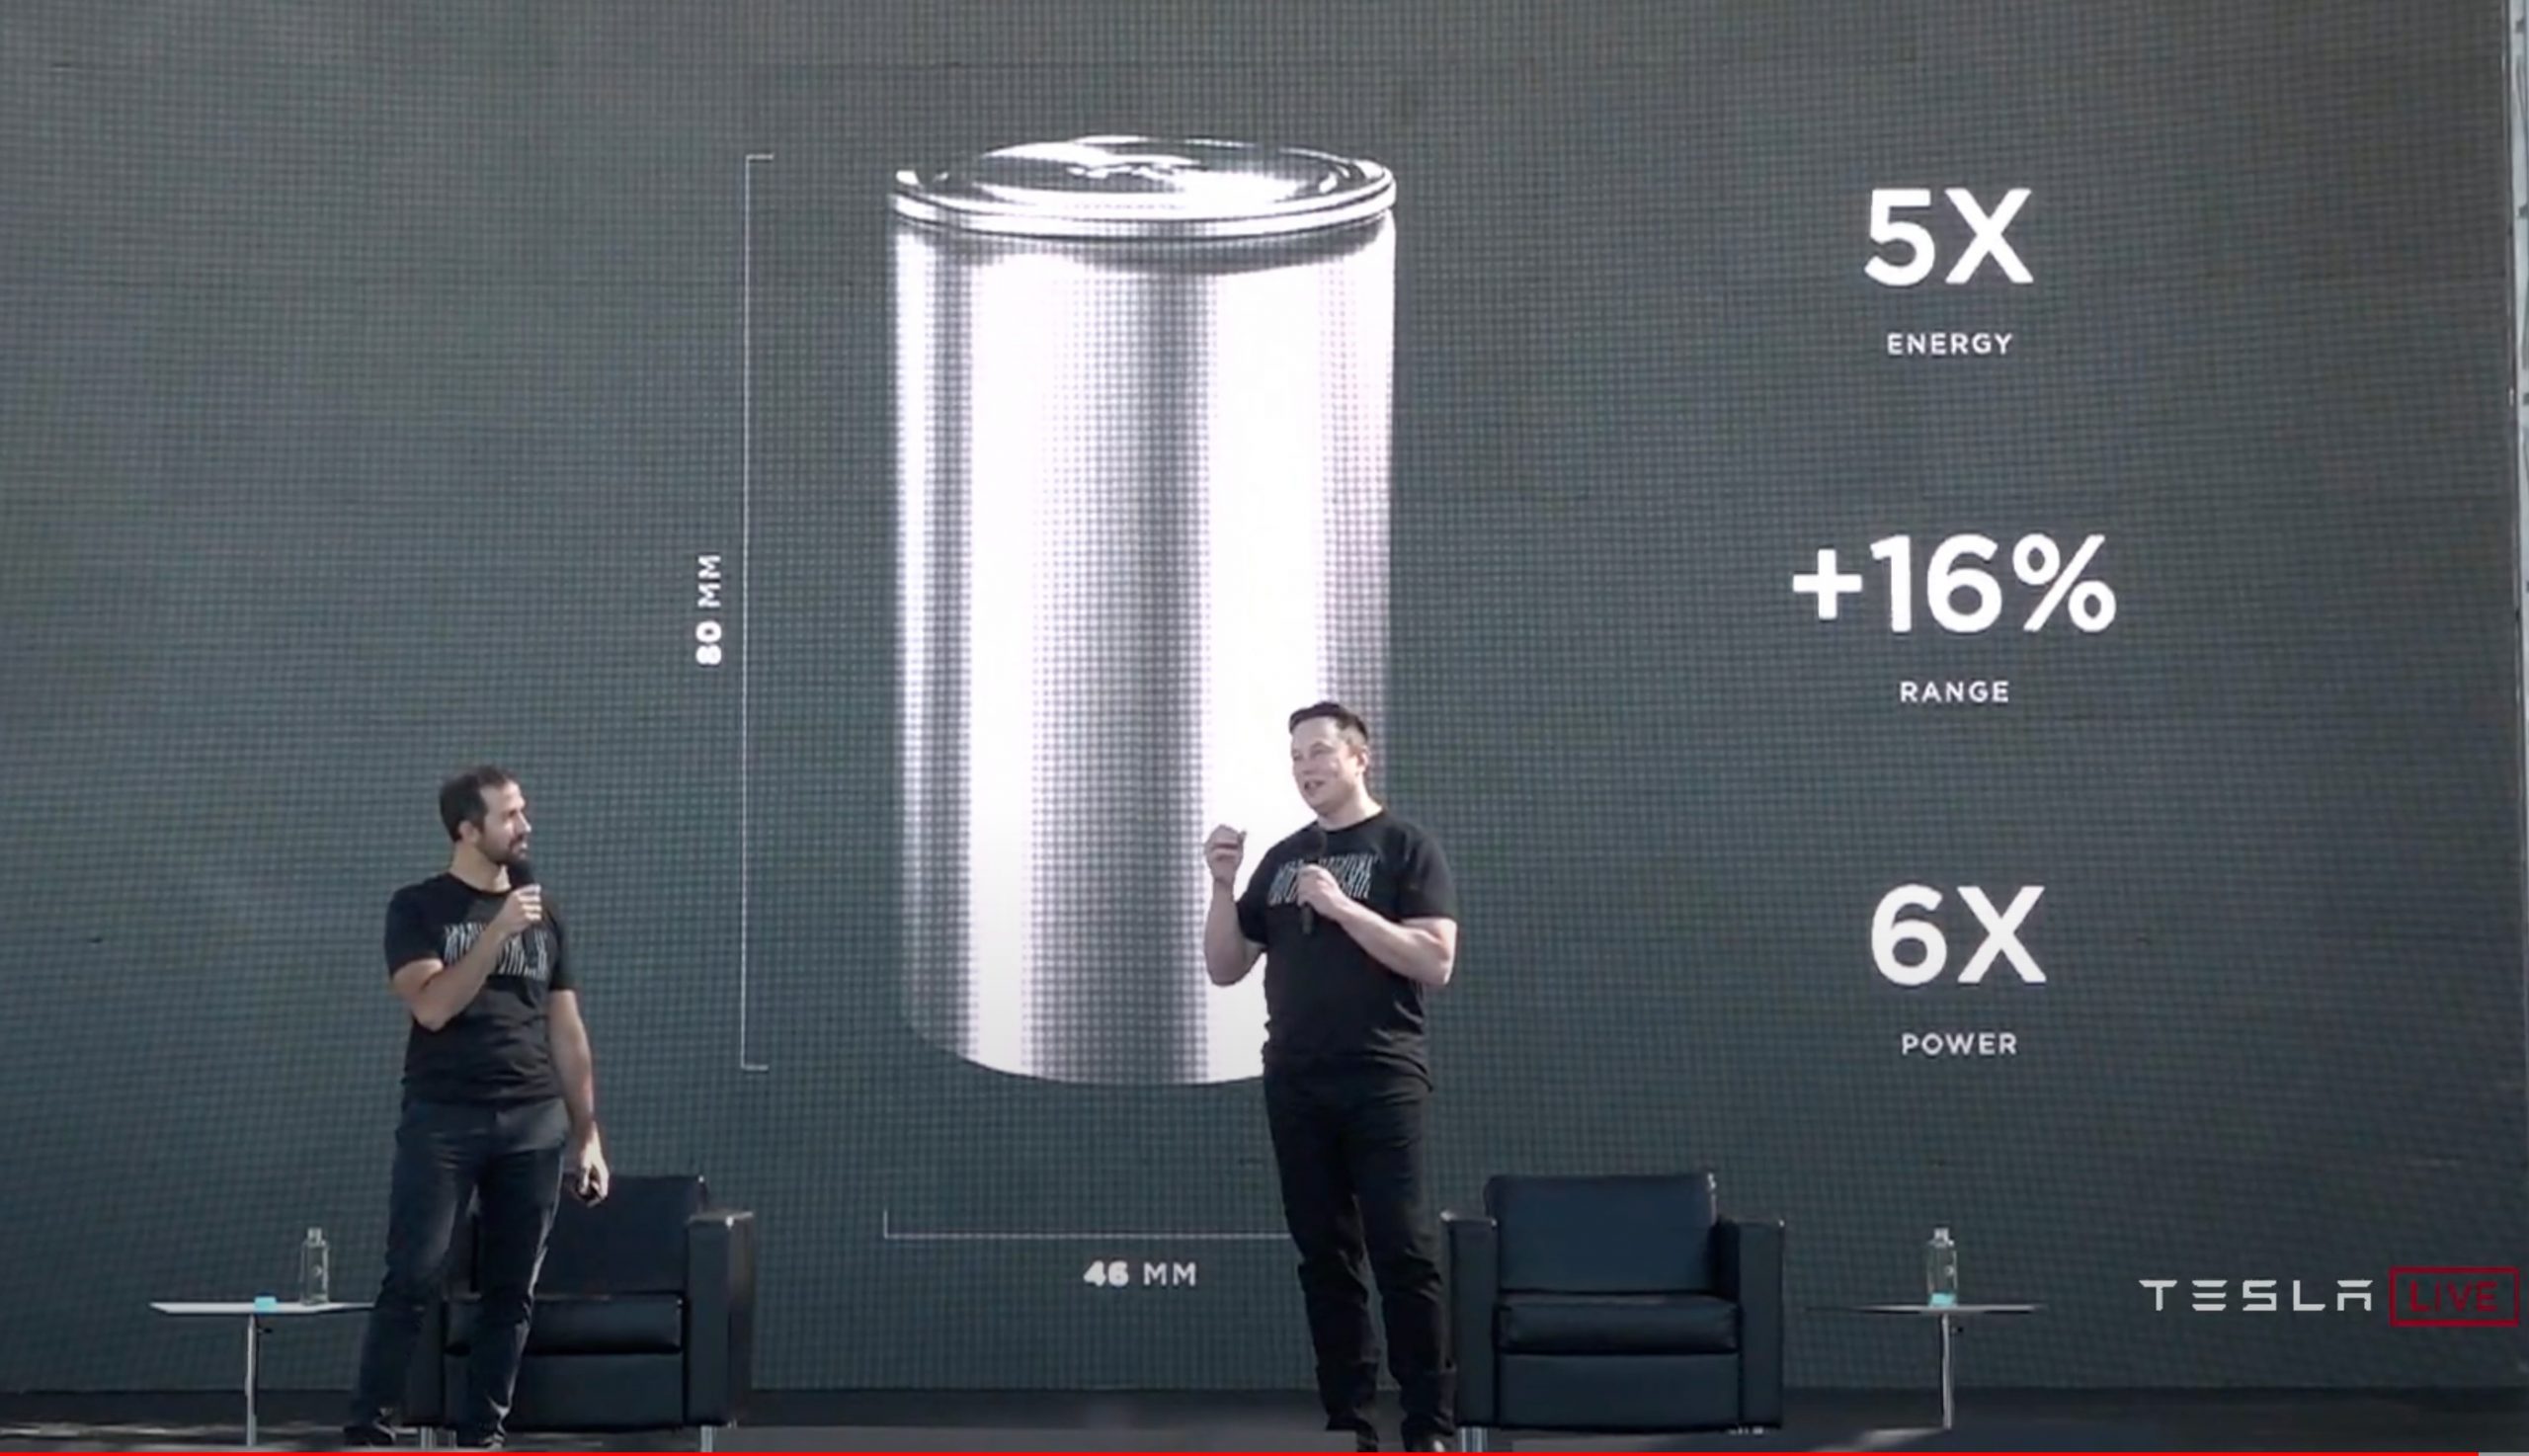 tesla-4680-cell-elon-musk-battery-day-event-scaled.jpg